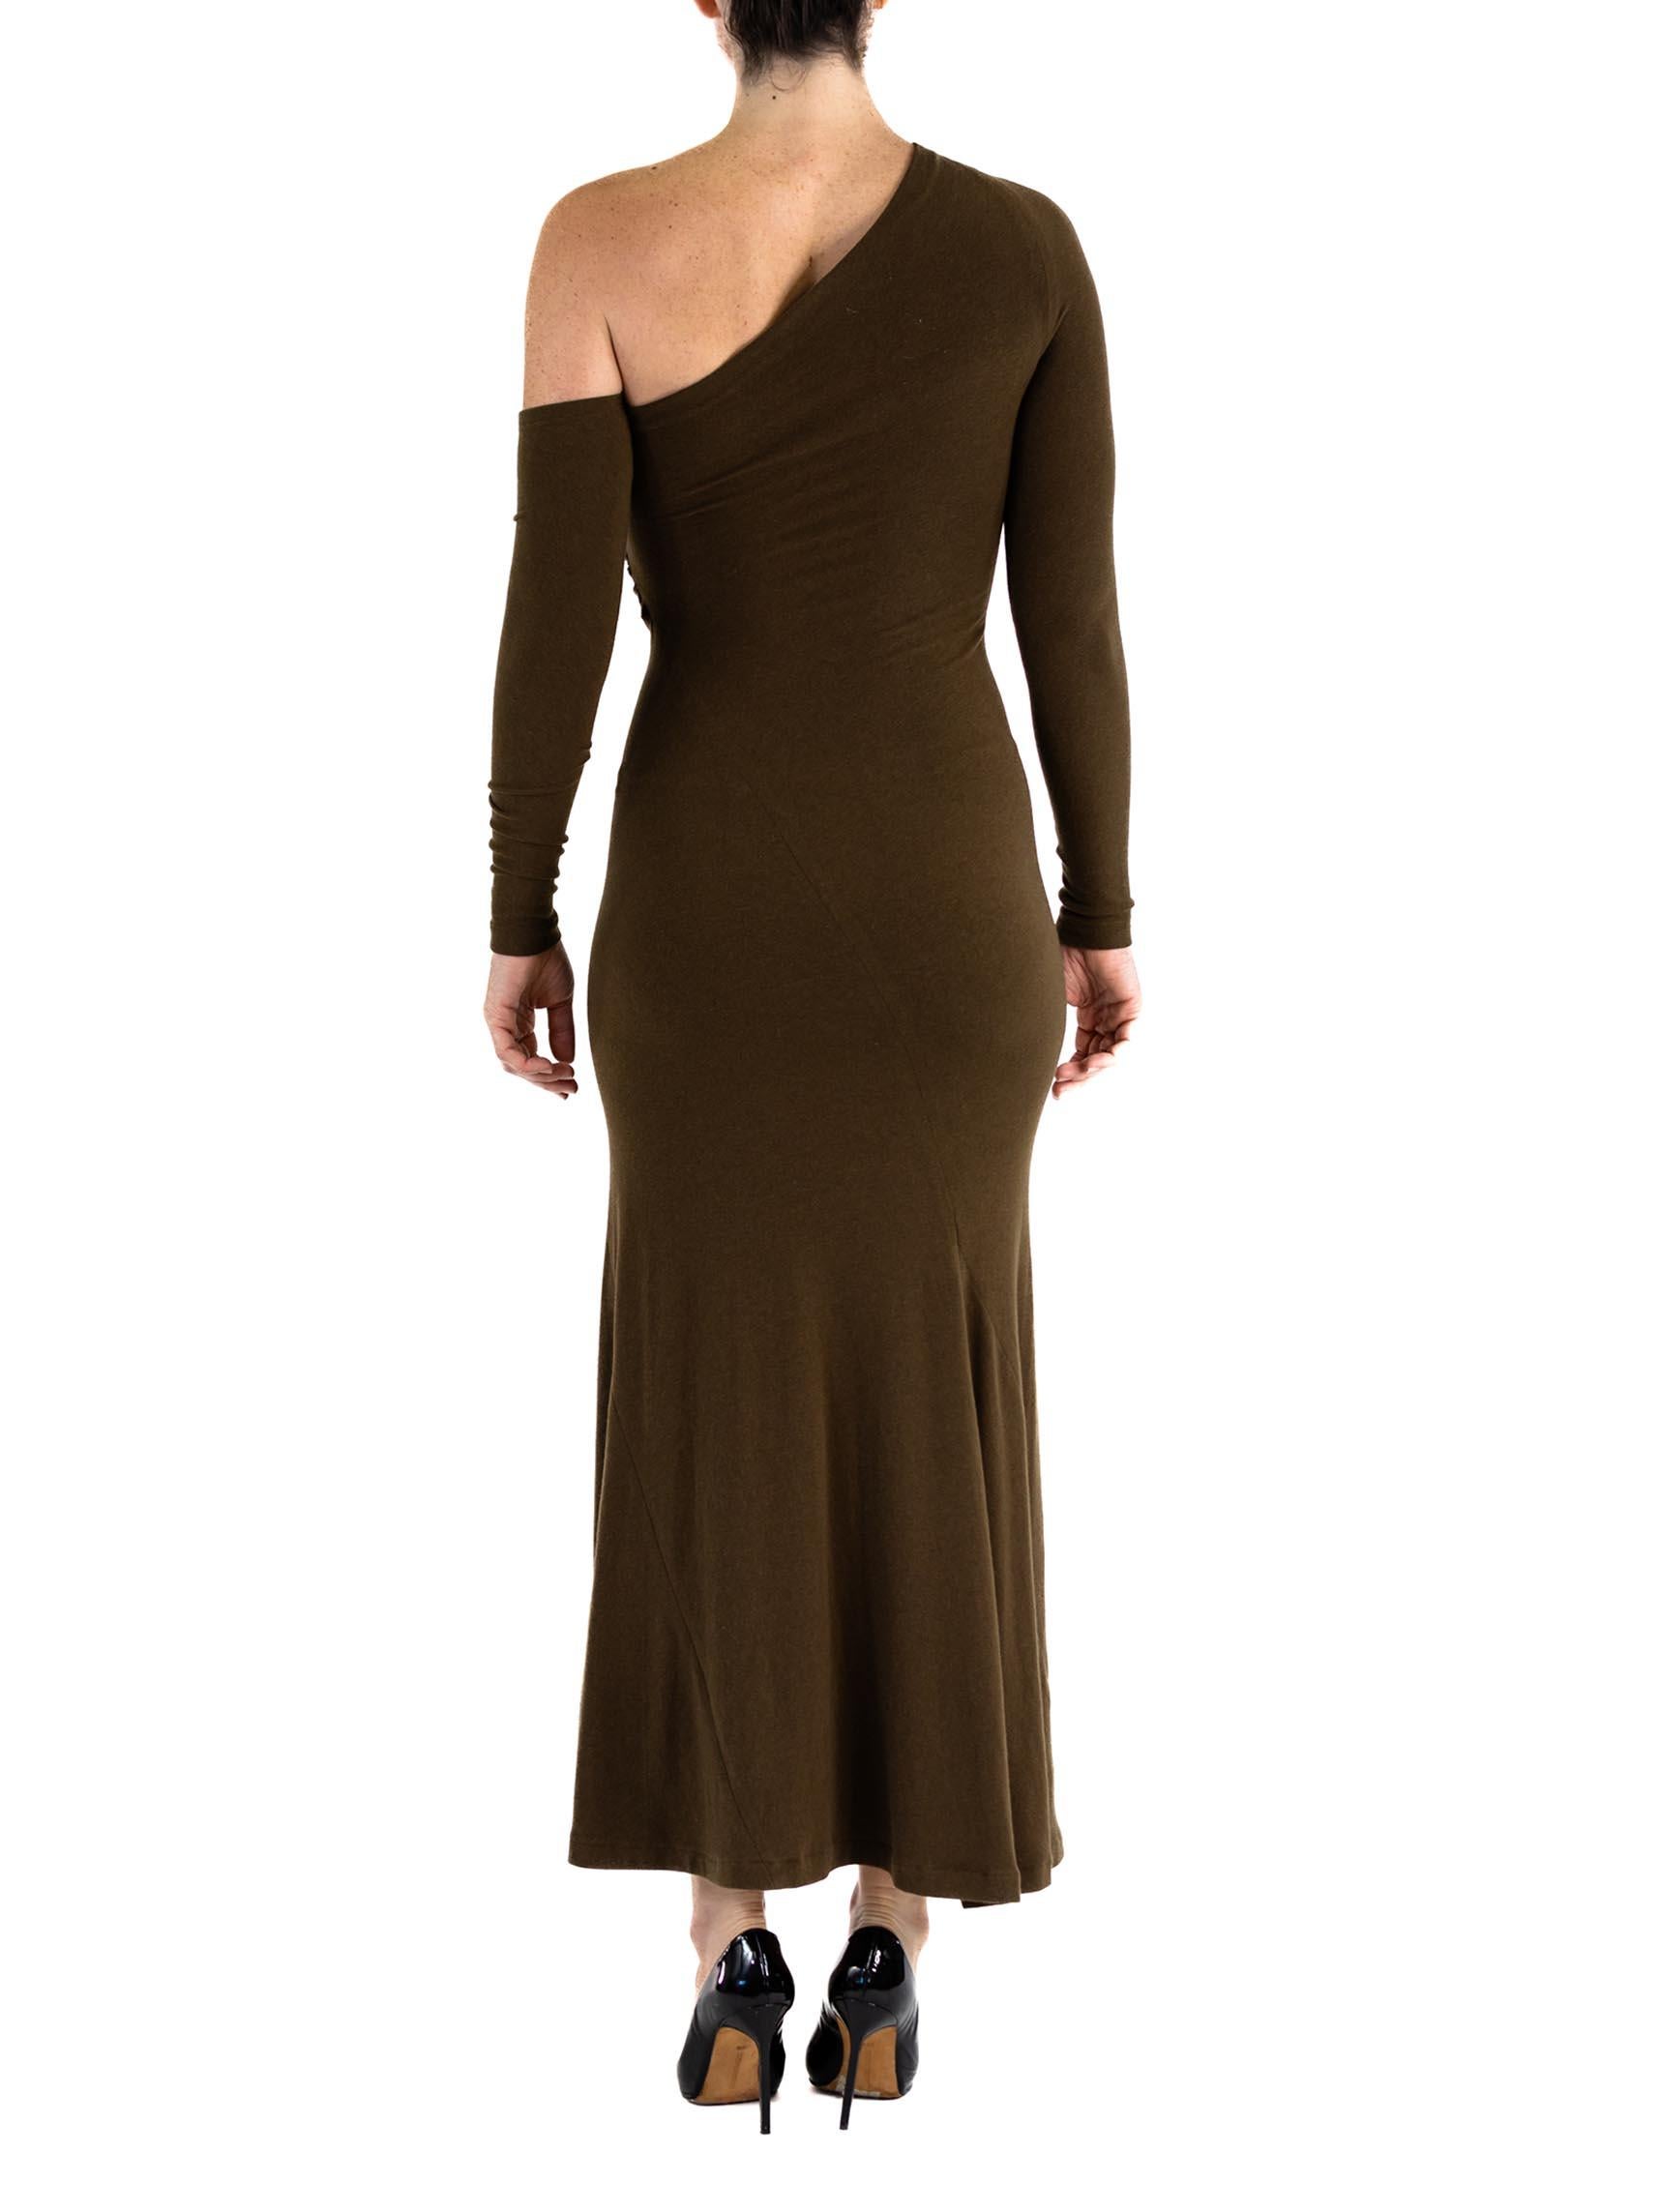 1990S DONNA KARAN Brown Rayon Blend Jersey Assymtetrical Neckline Ruched Gown W For Sale 3